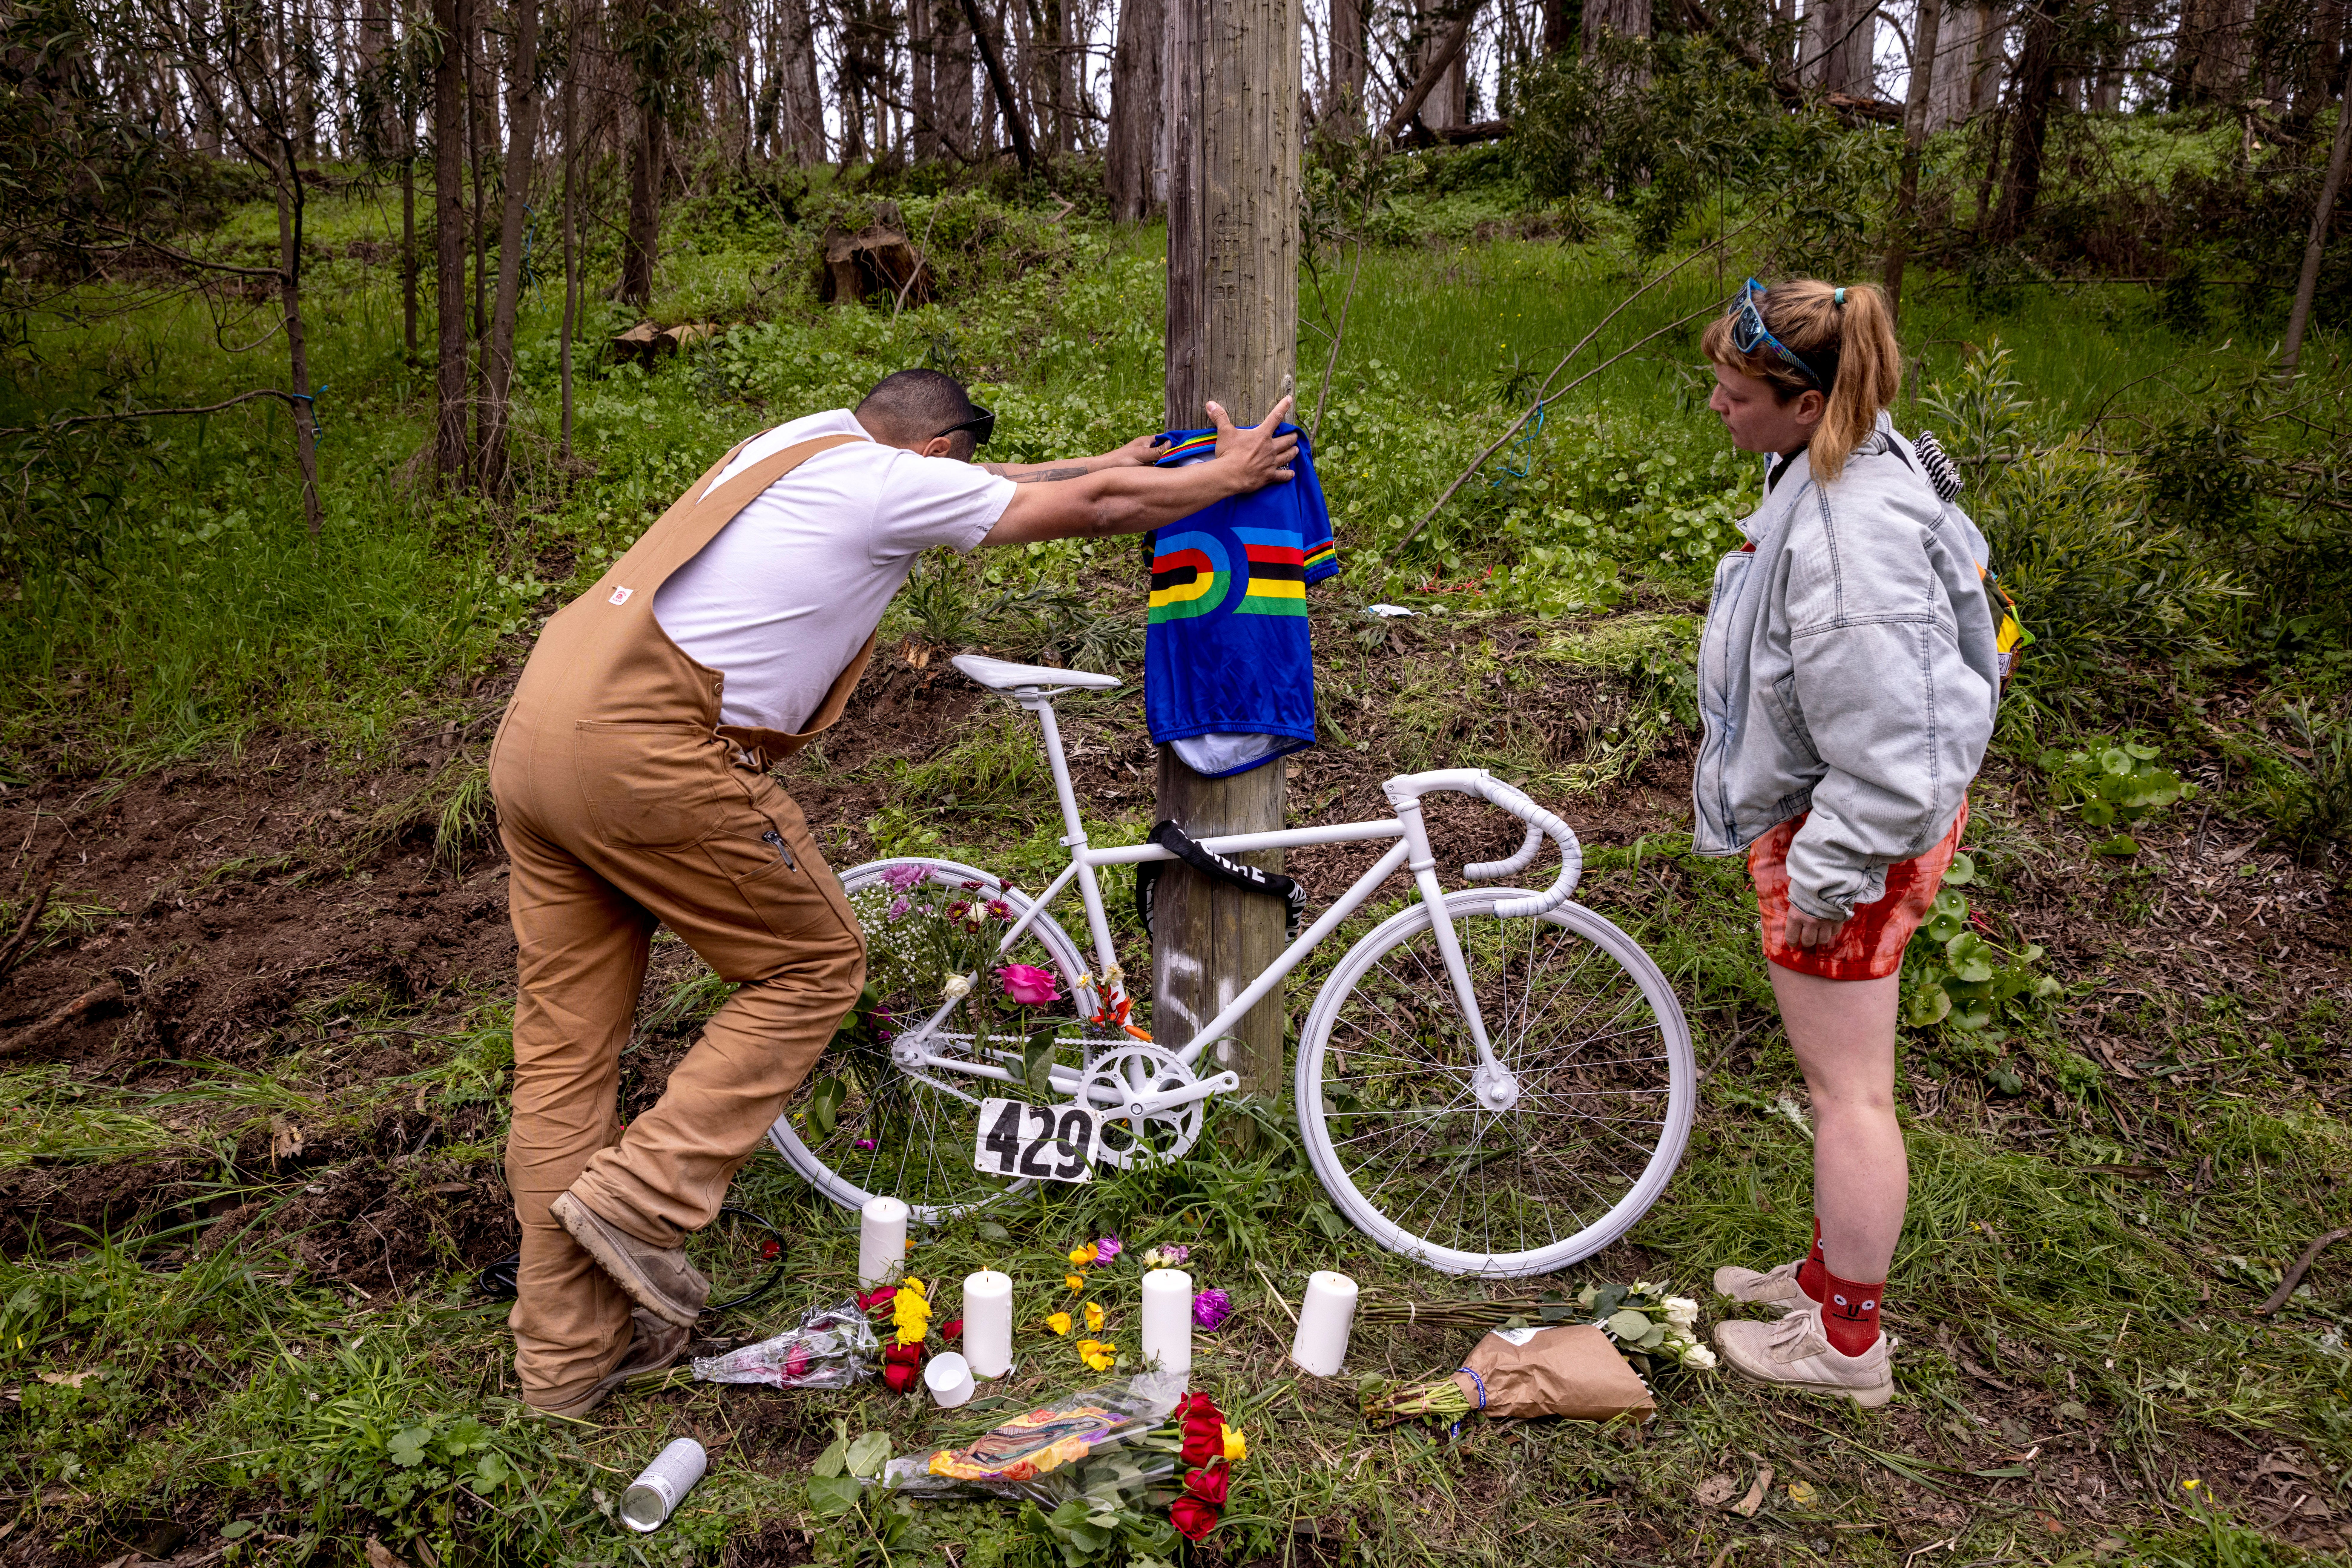 Members of the San Franciso cycling community erected a memorial to Ethan Boyes at the Arguello Boulevard location where he was struck by a car